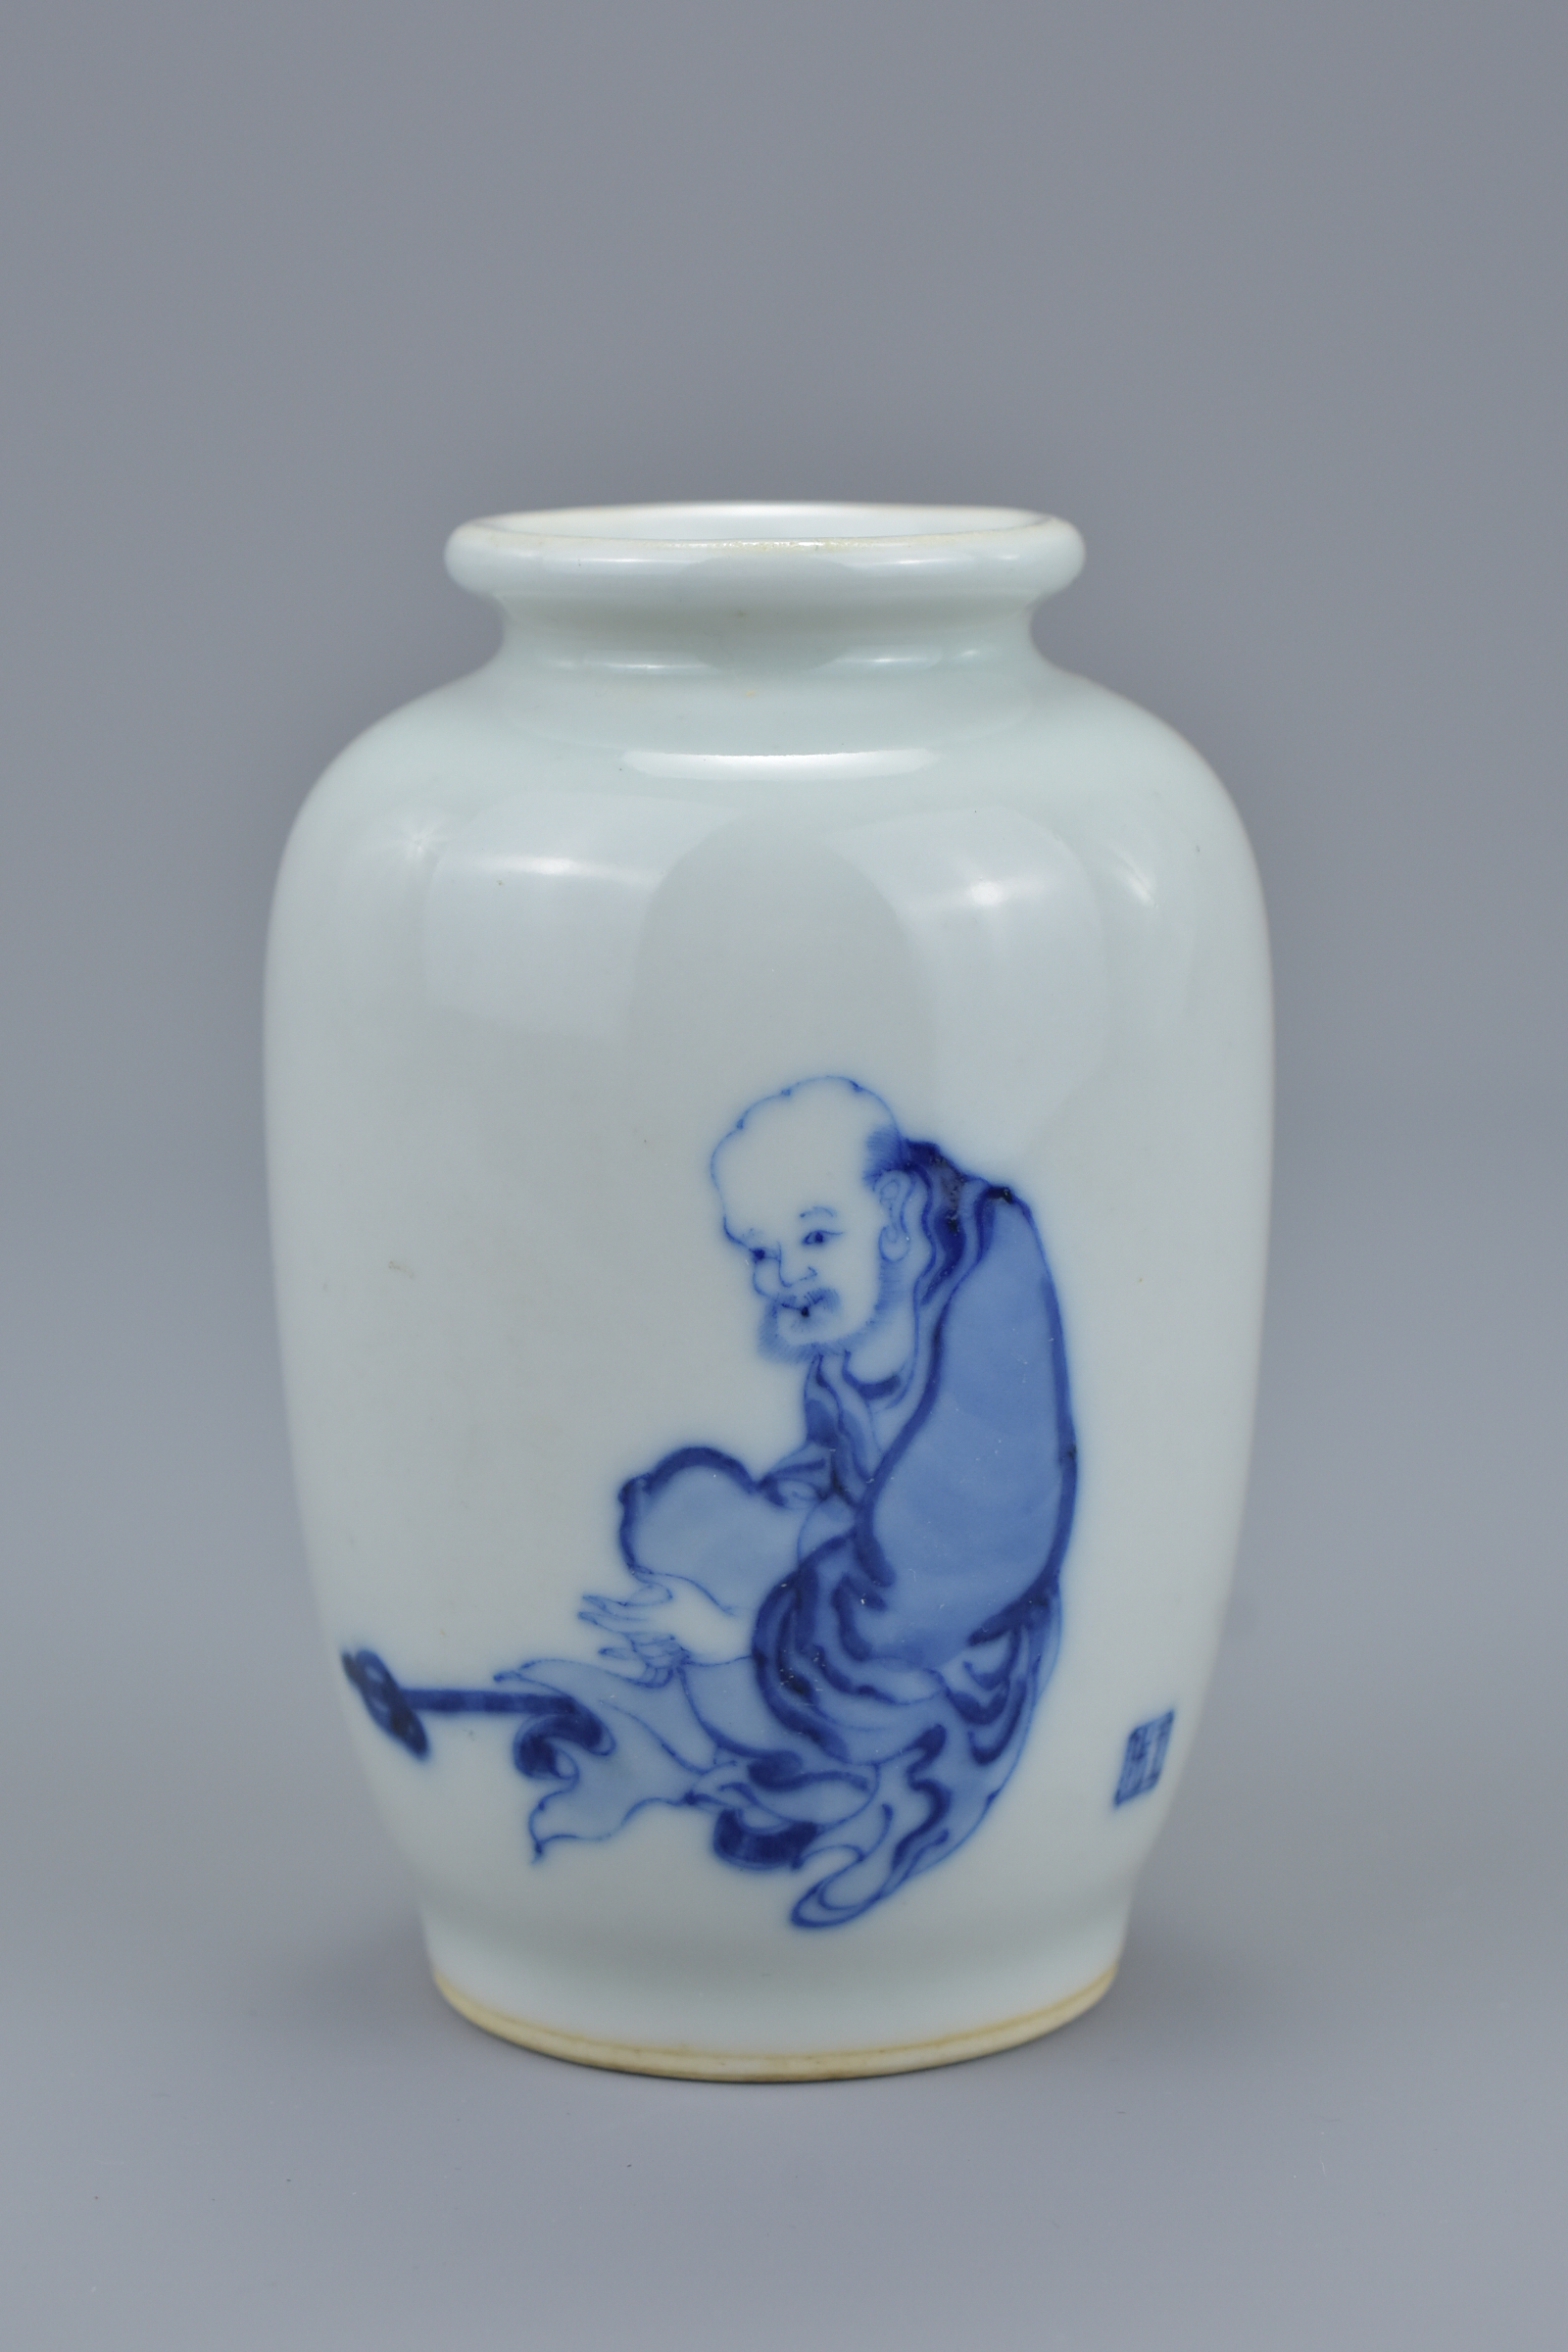 A small quality Chinese Republic period blue and white porcelain vase painted with single figure of